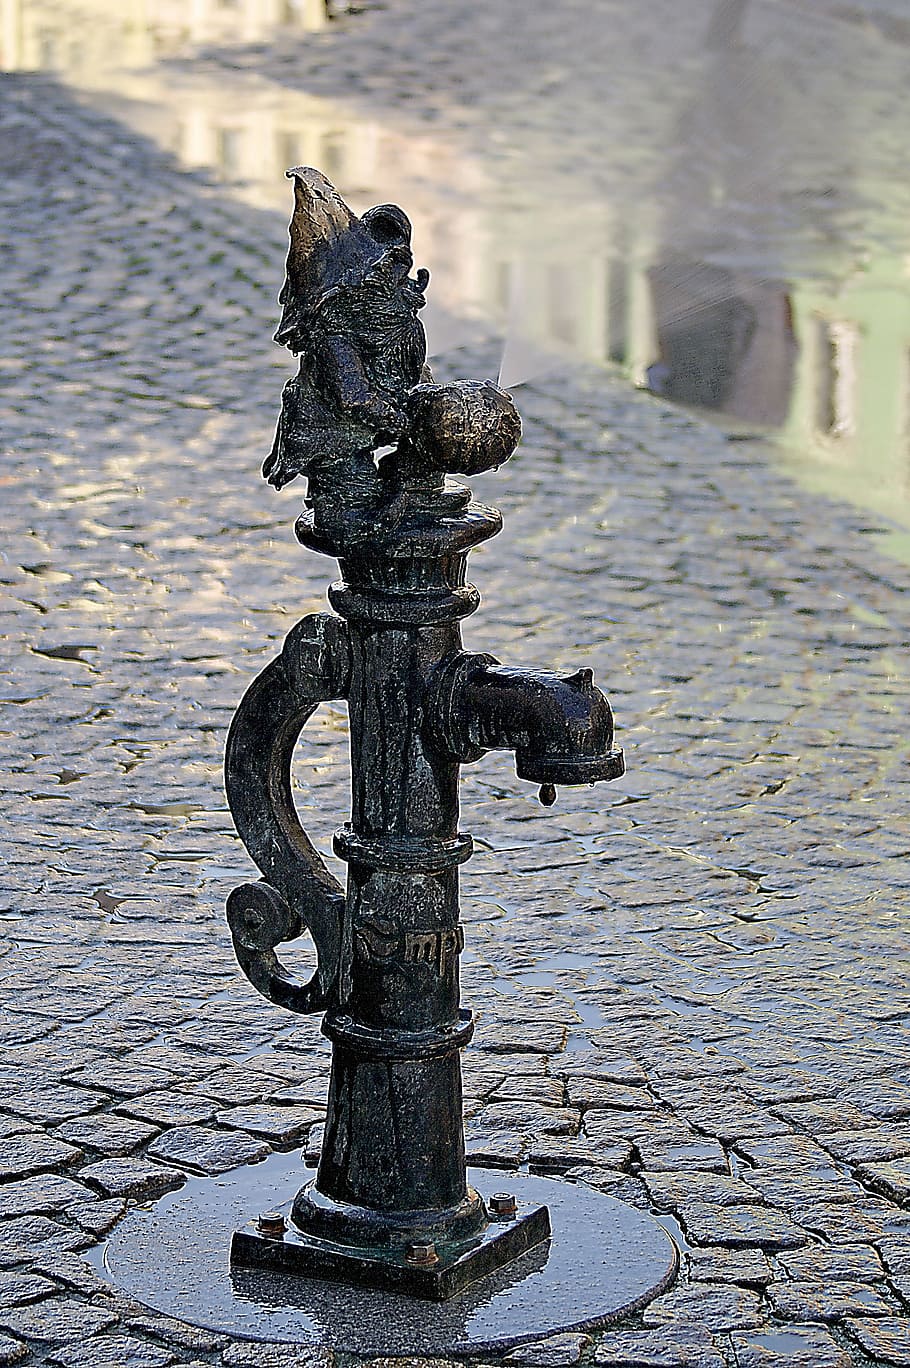 wrocław, the market, the old town, well, water intake, style, wroclaw old town, sprinkler, water, coolness